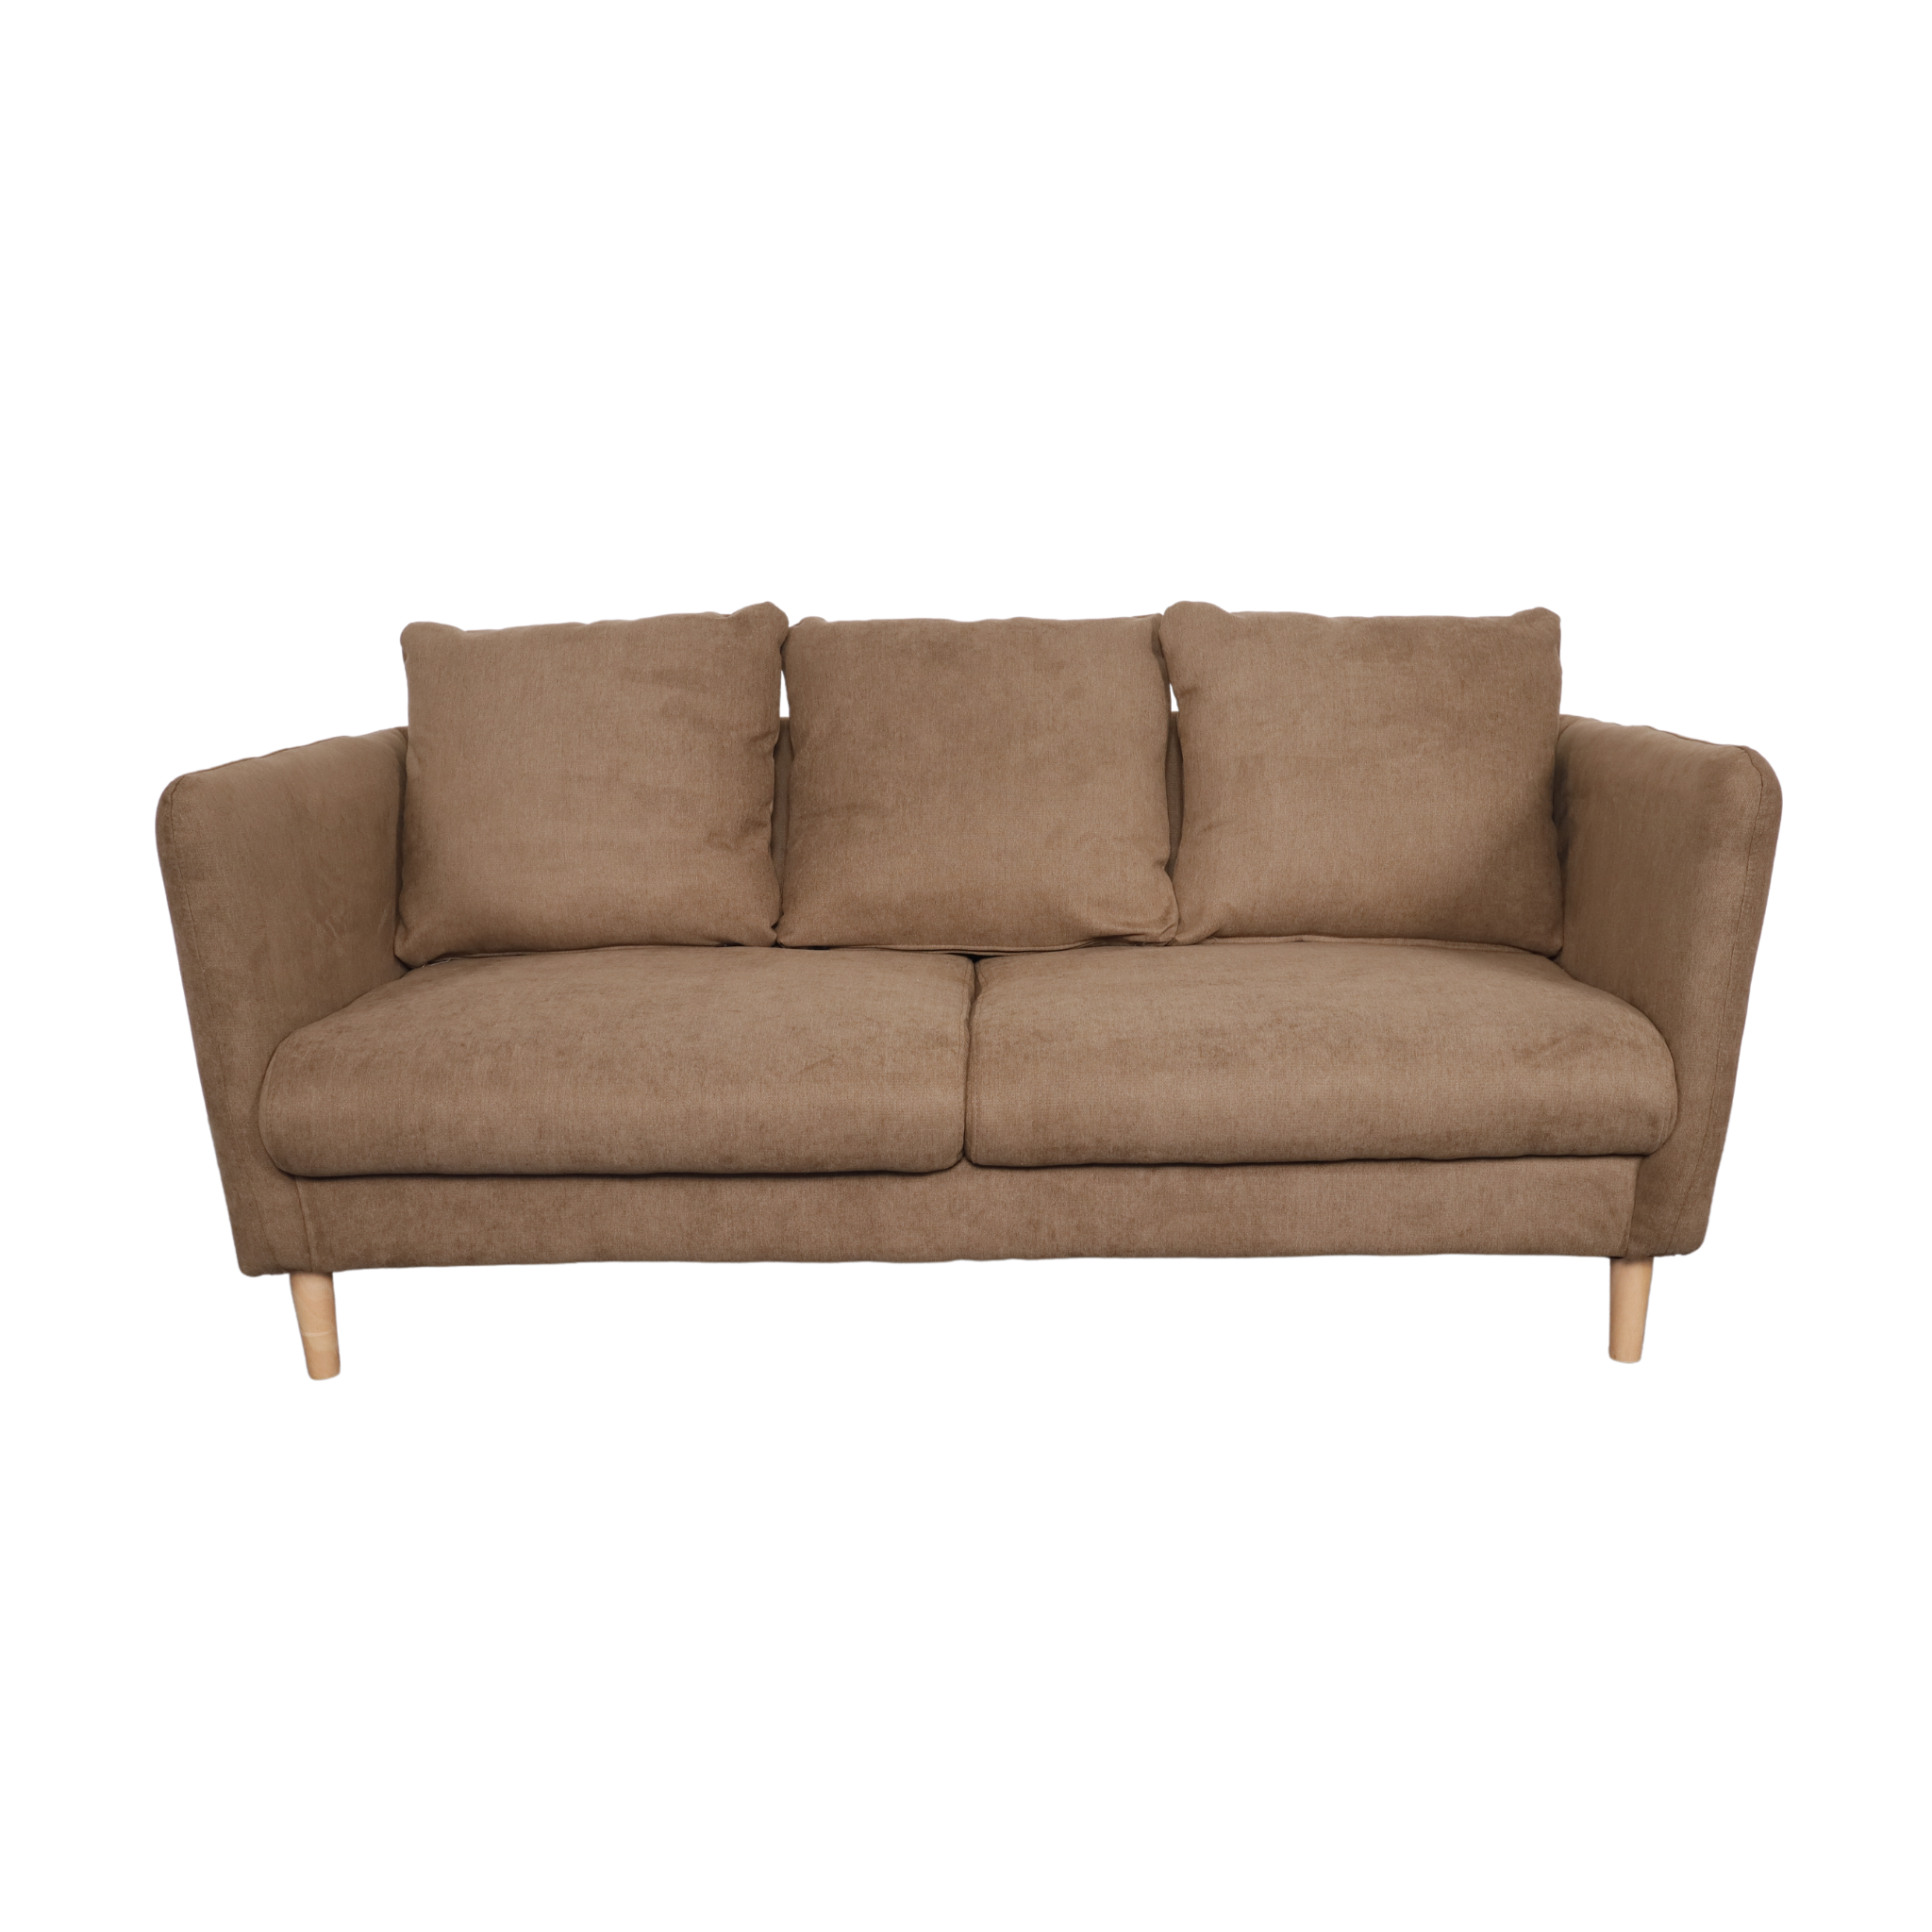 JANE 3 Seater Fabric Sofa AF Home